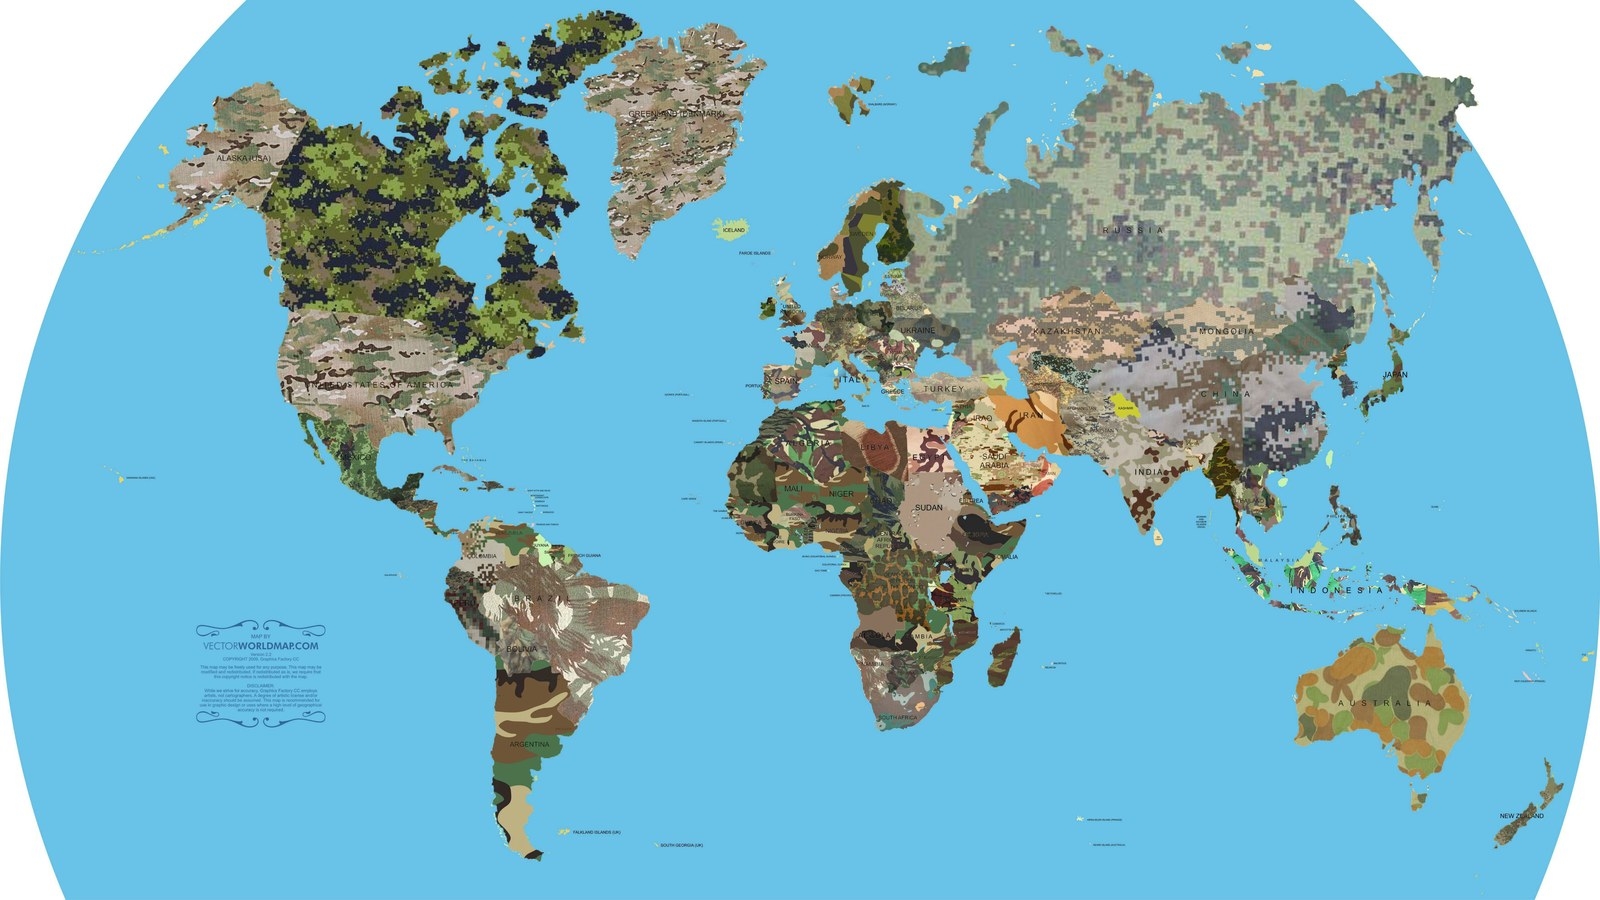 24. The various camouflage patterns of the world: